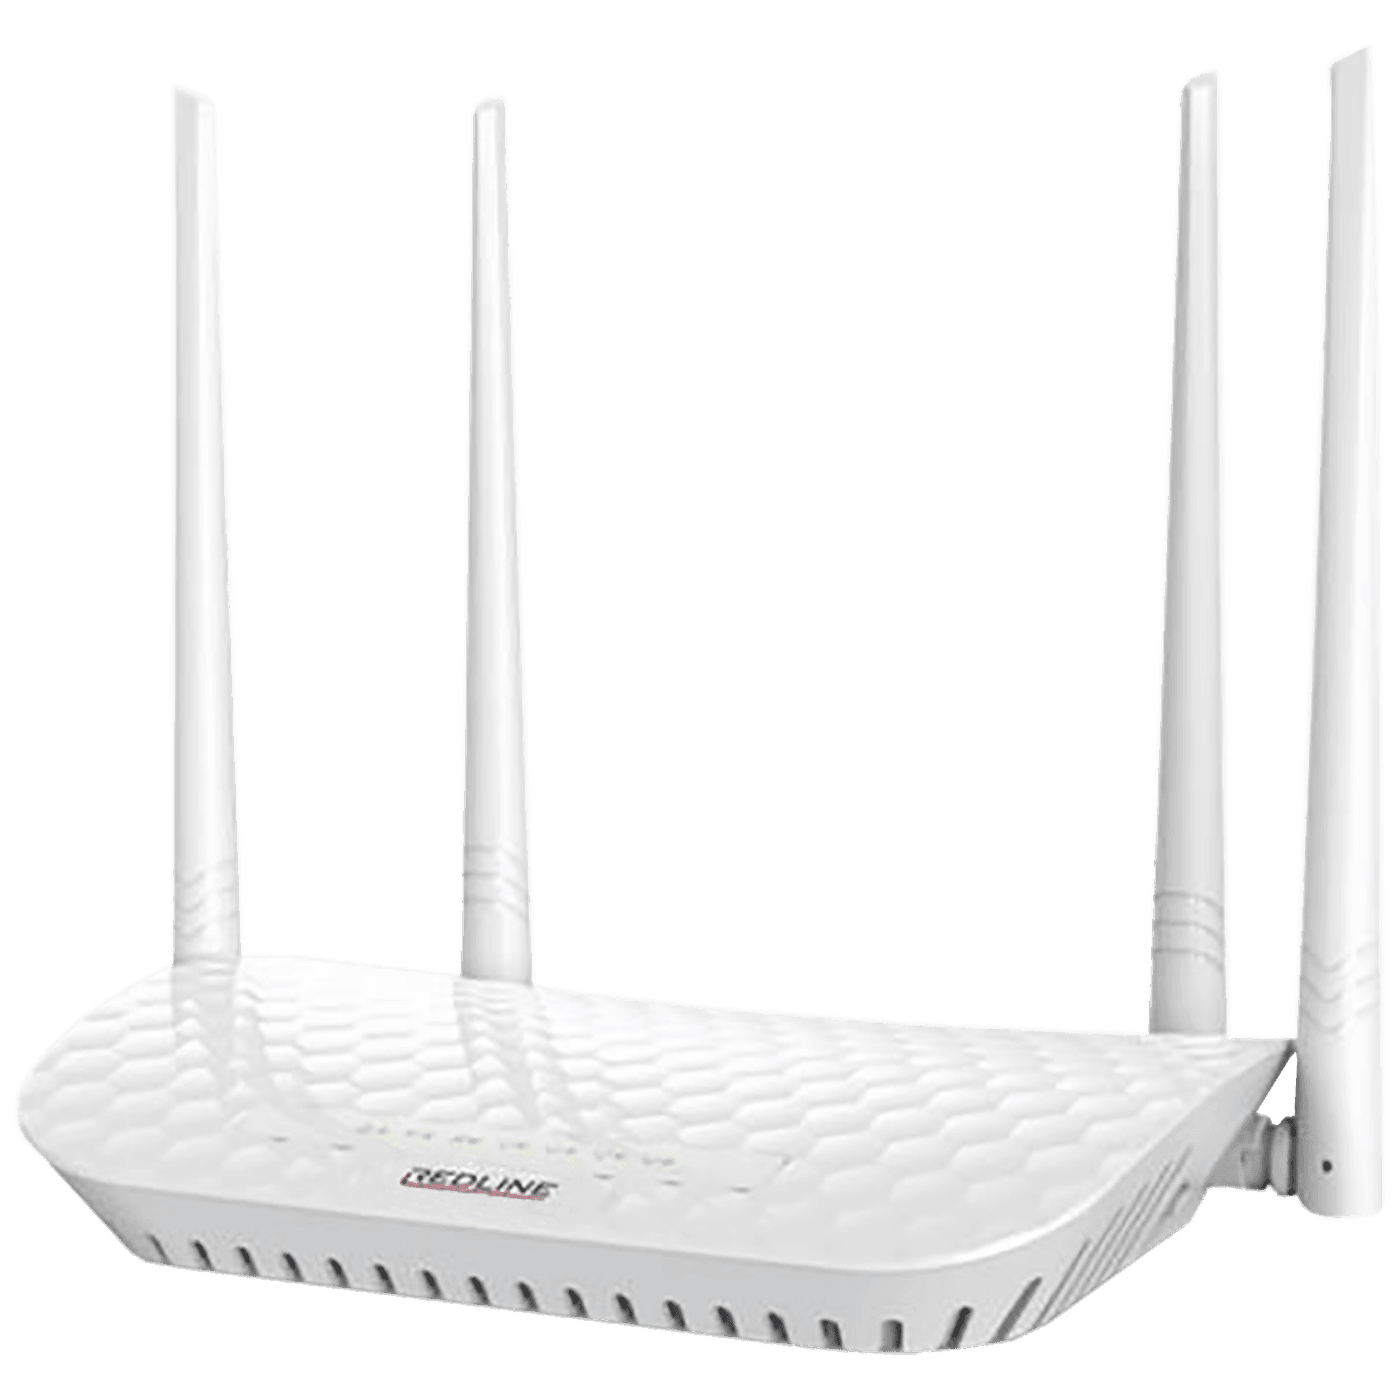 Selected image for REDLINE Wireless N Router 4 porta 300Mbps 4 x 5 dBi antena